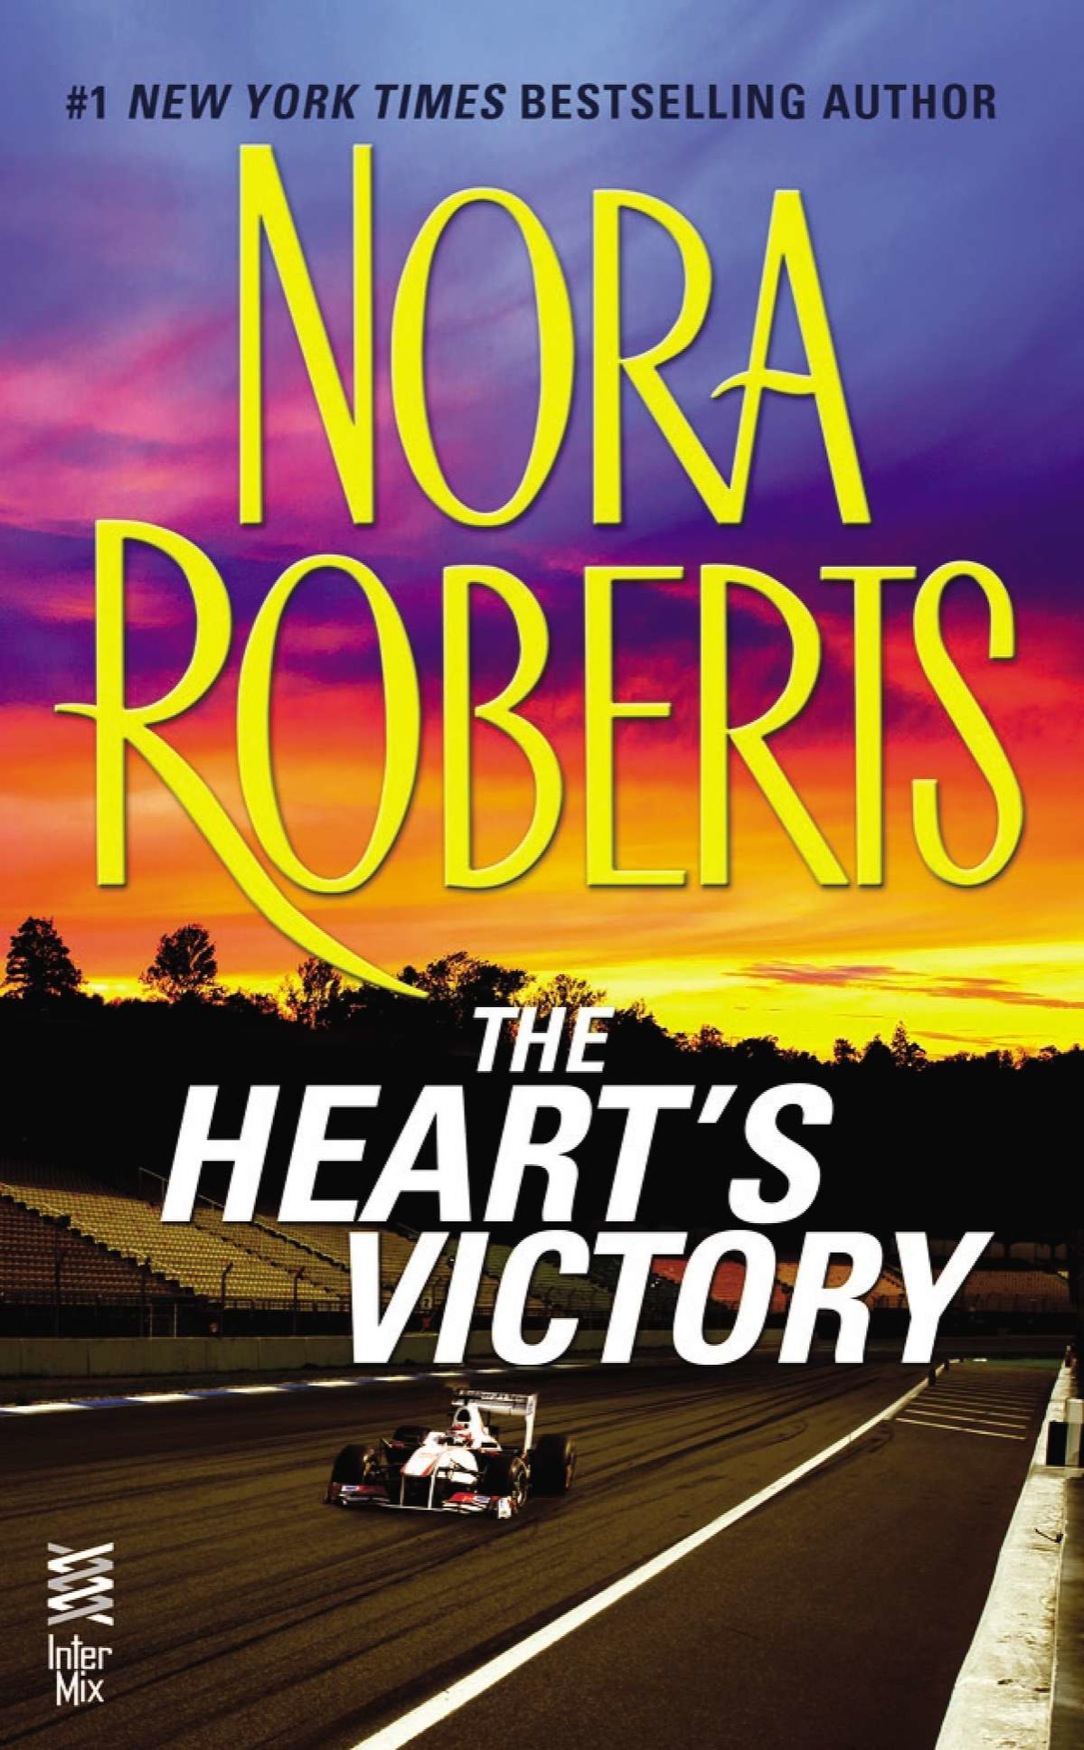 The Heart's Victory (2012)